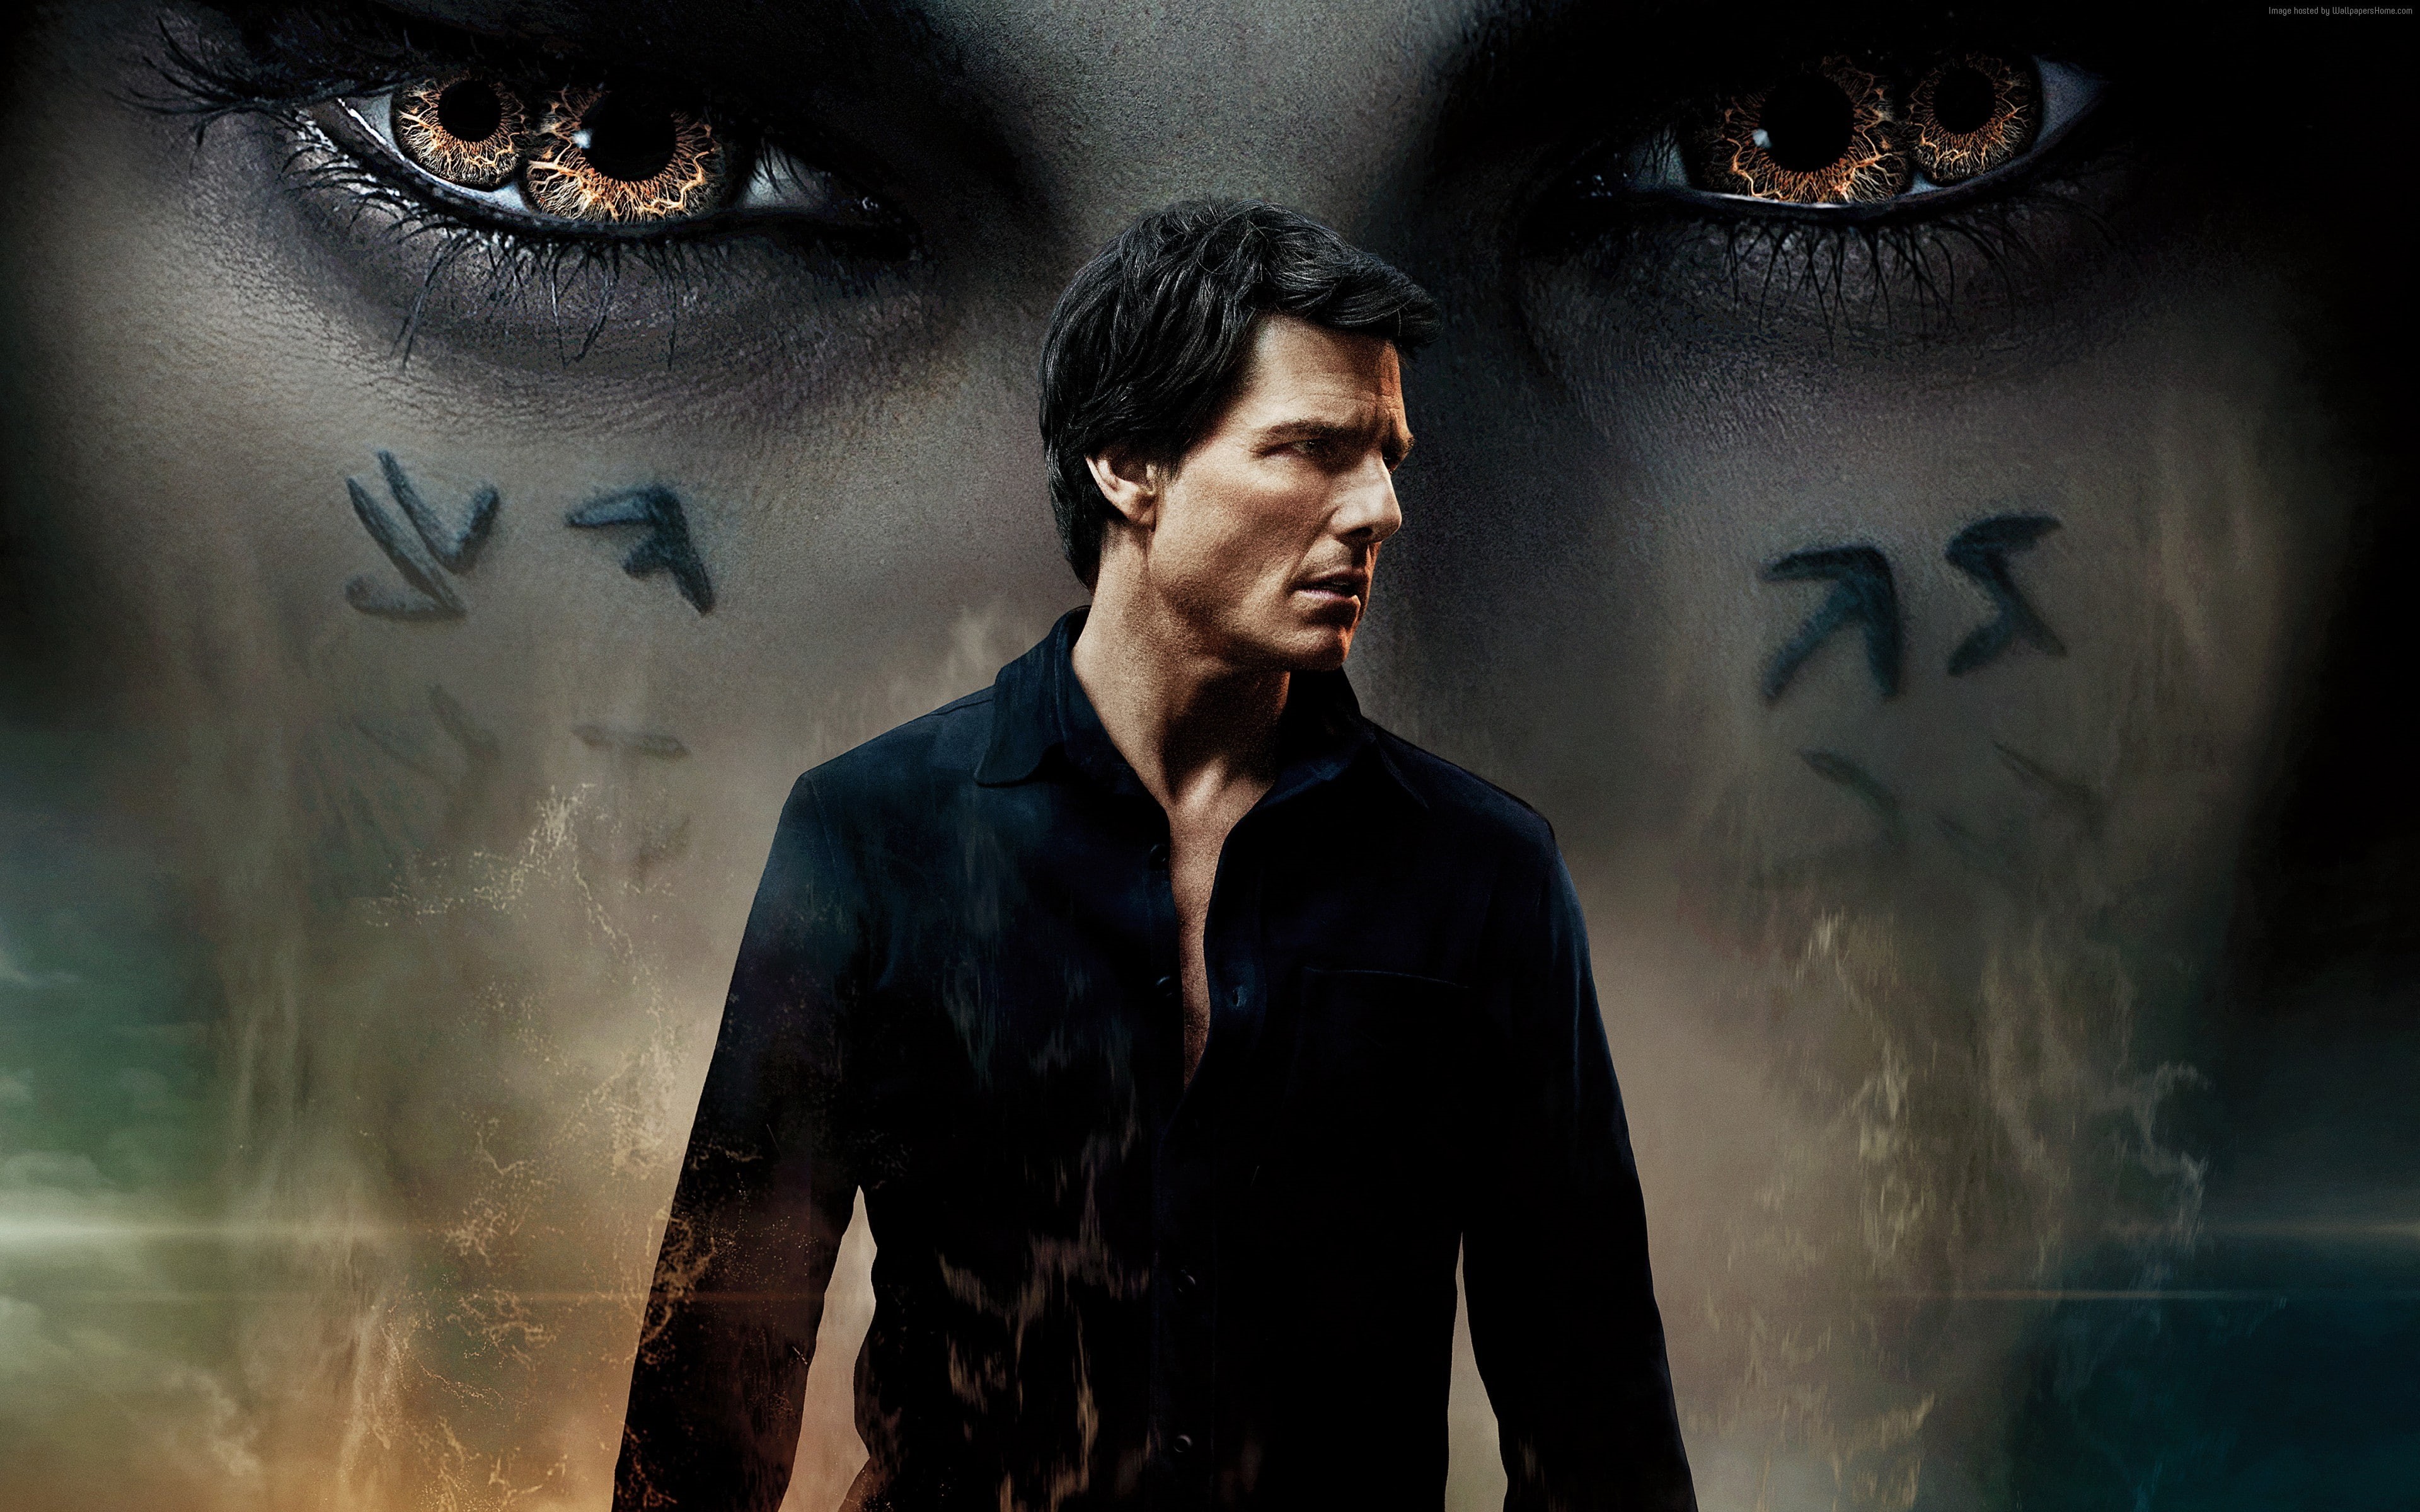 Wallpaper / The Mummy, best movies, 4K, Tom Cruise free download